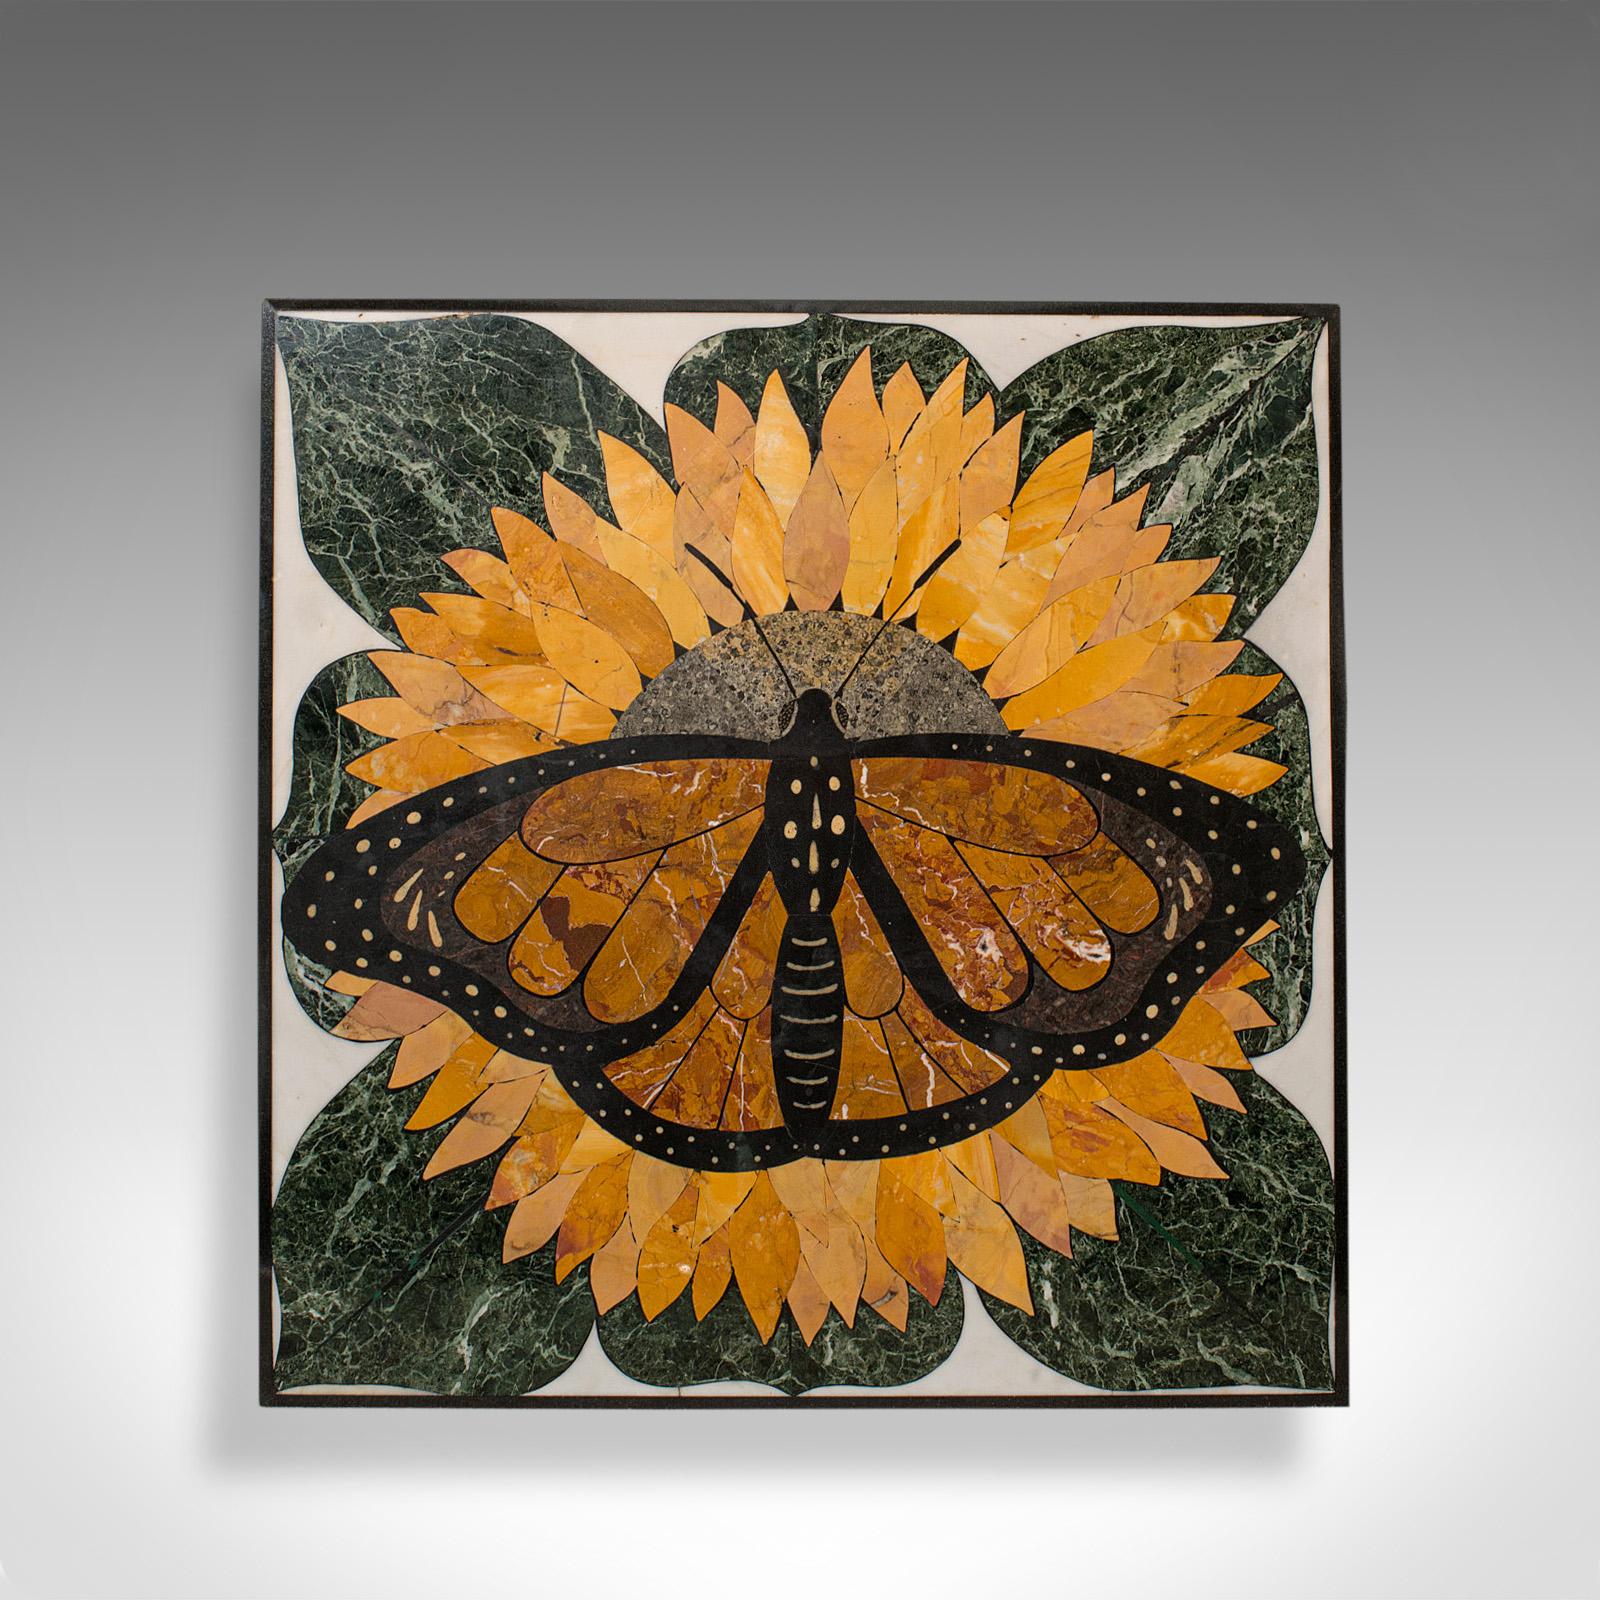 20th Century 'Monarch', Vintage Butterfly Pietra Dura Table, English, Decorative, Marble For Sale